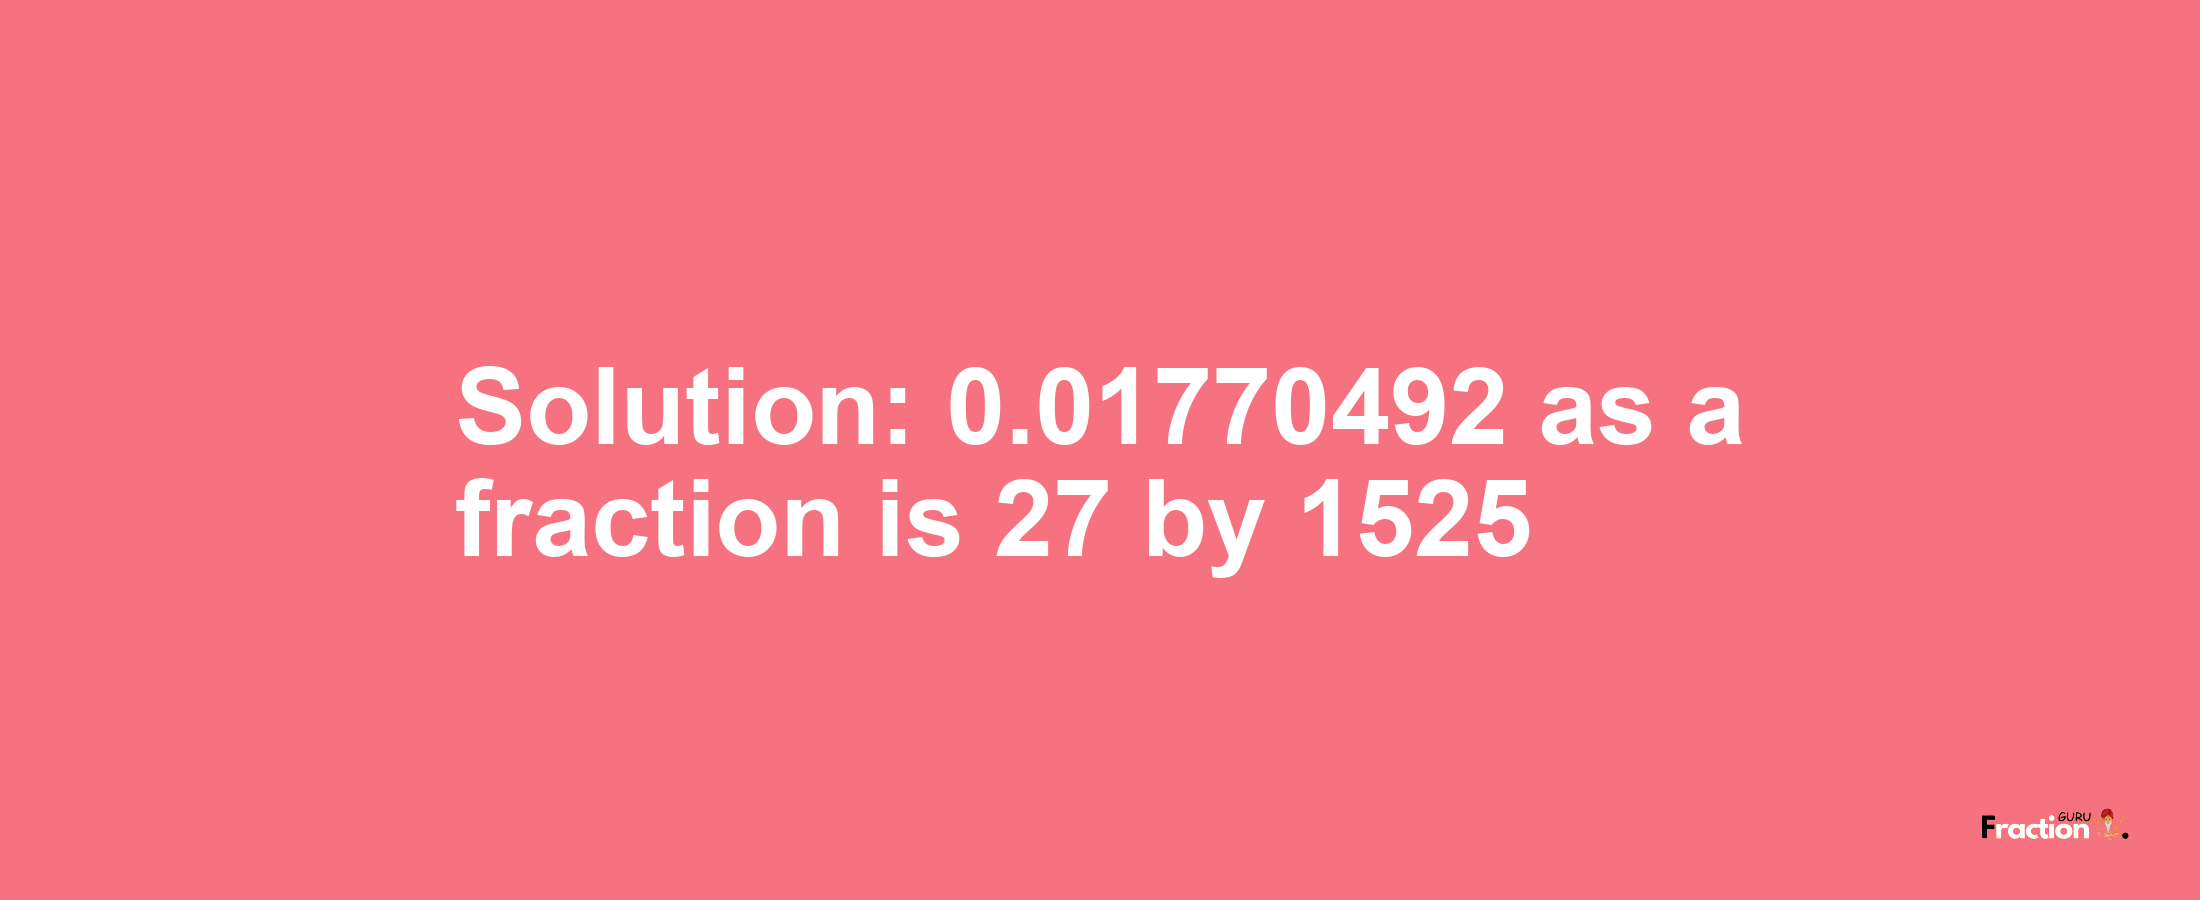 Solution:0.01770492 as a fraction is 27/1525